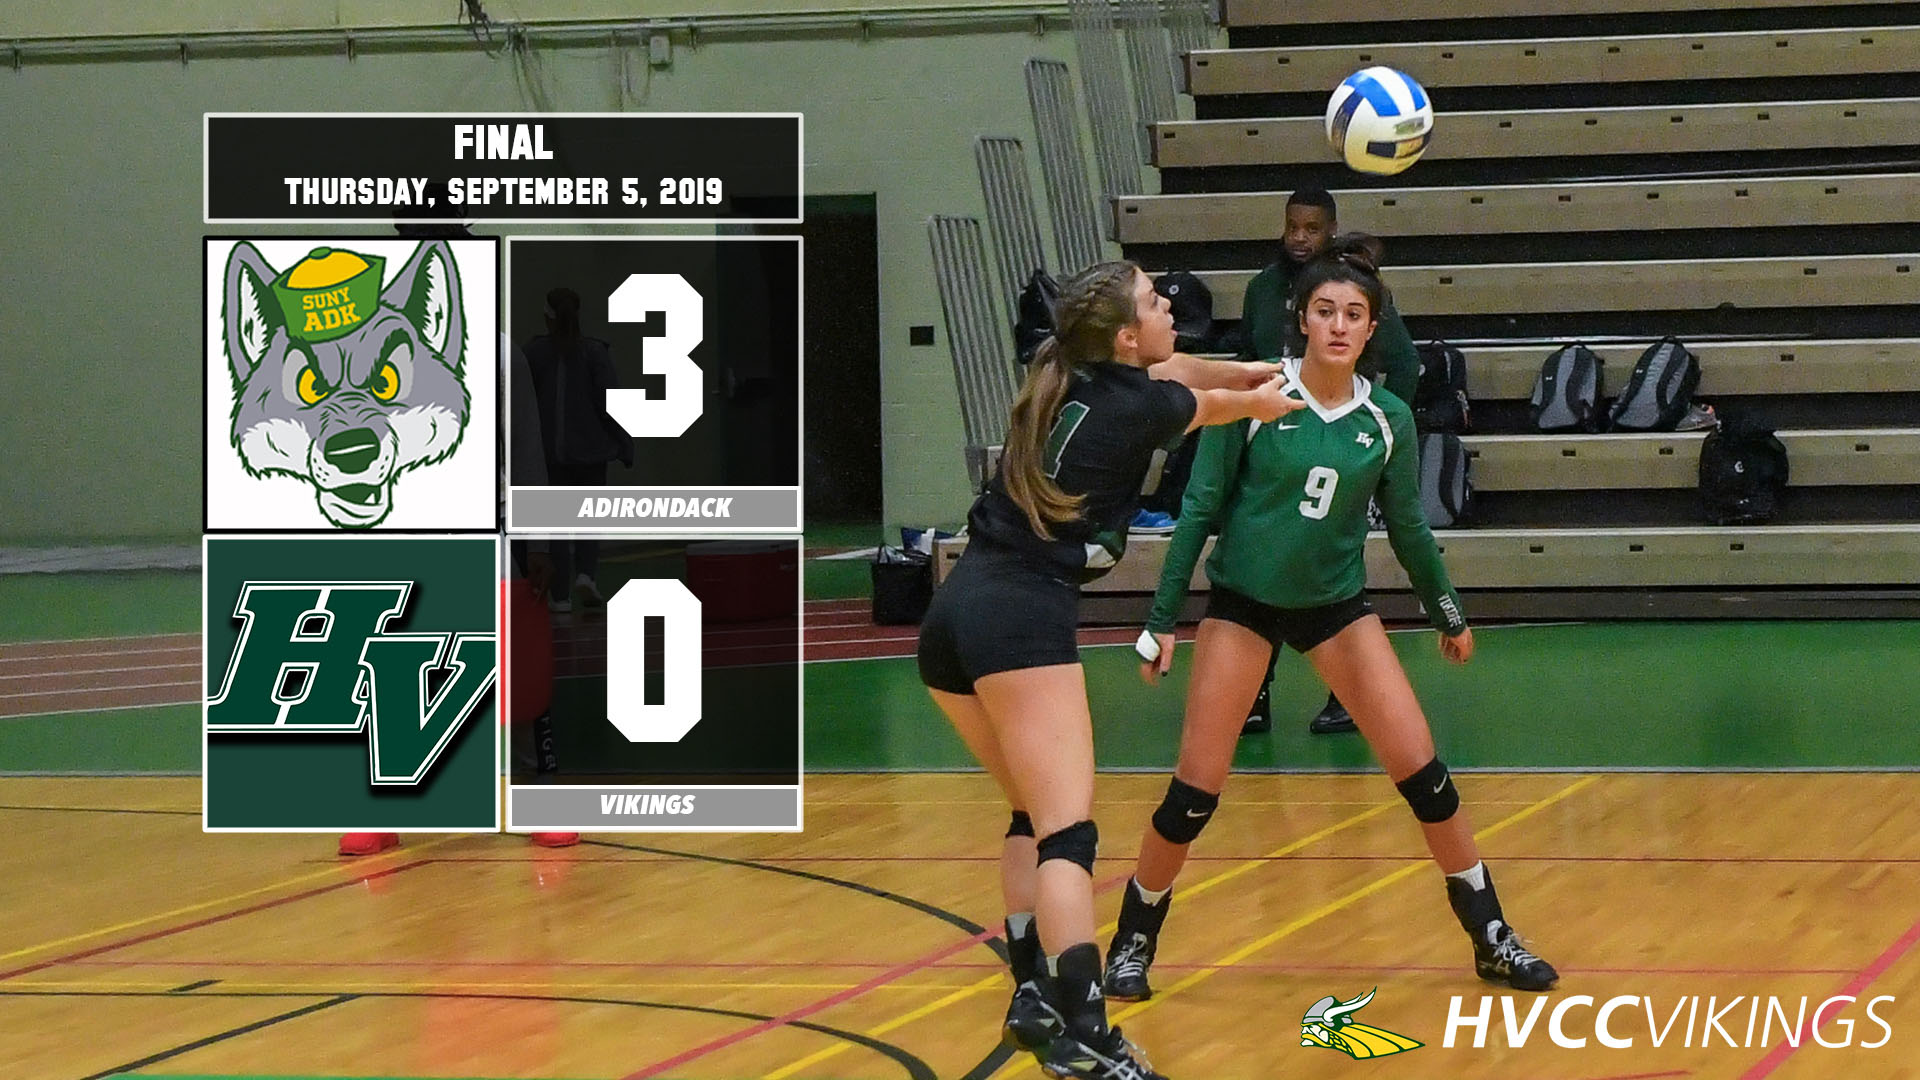 Volleyball defeated by Adirondack 3-0 on Sept. 5, 2019